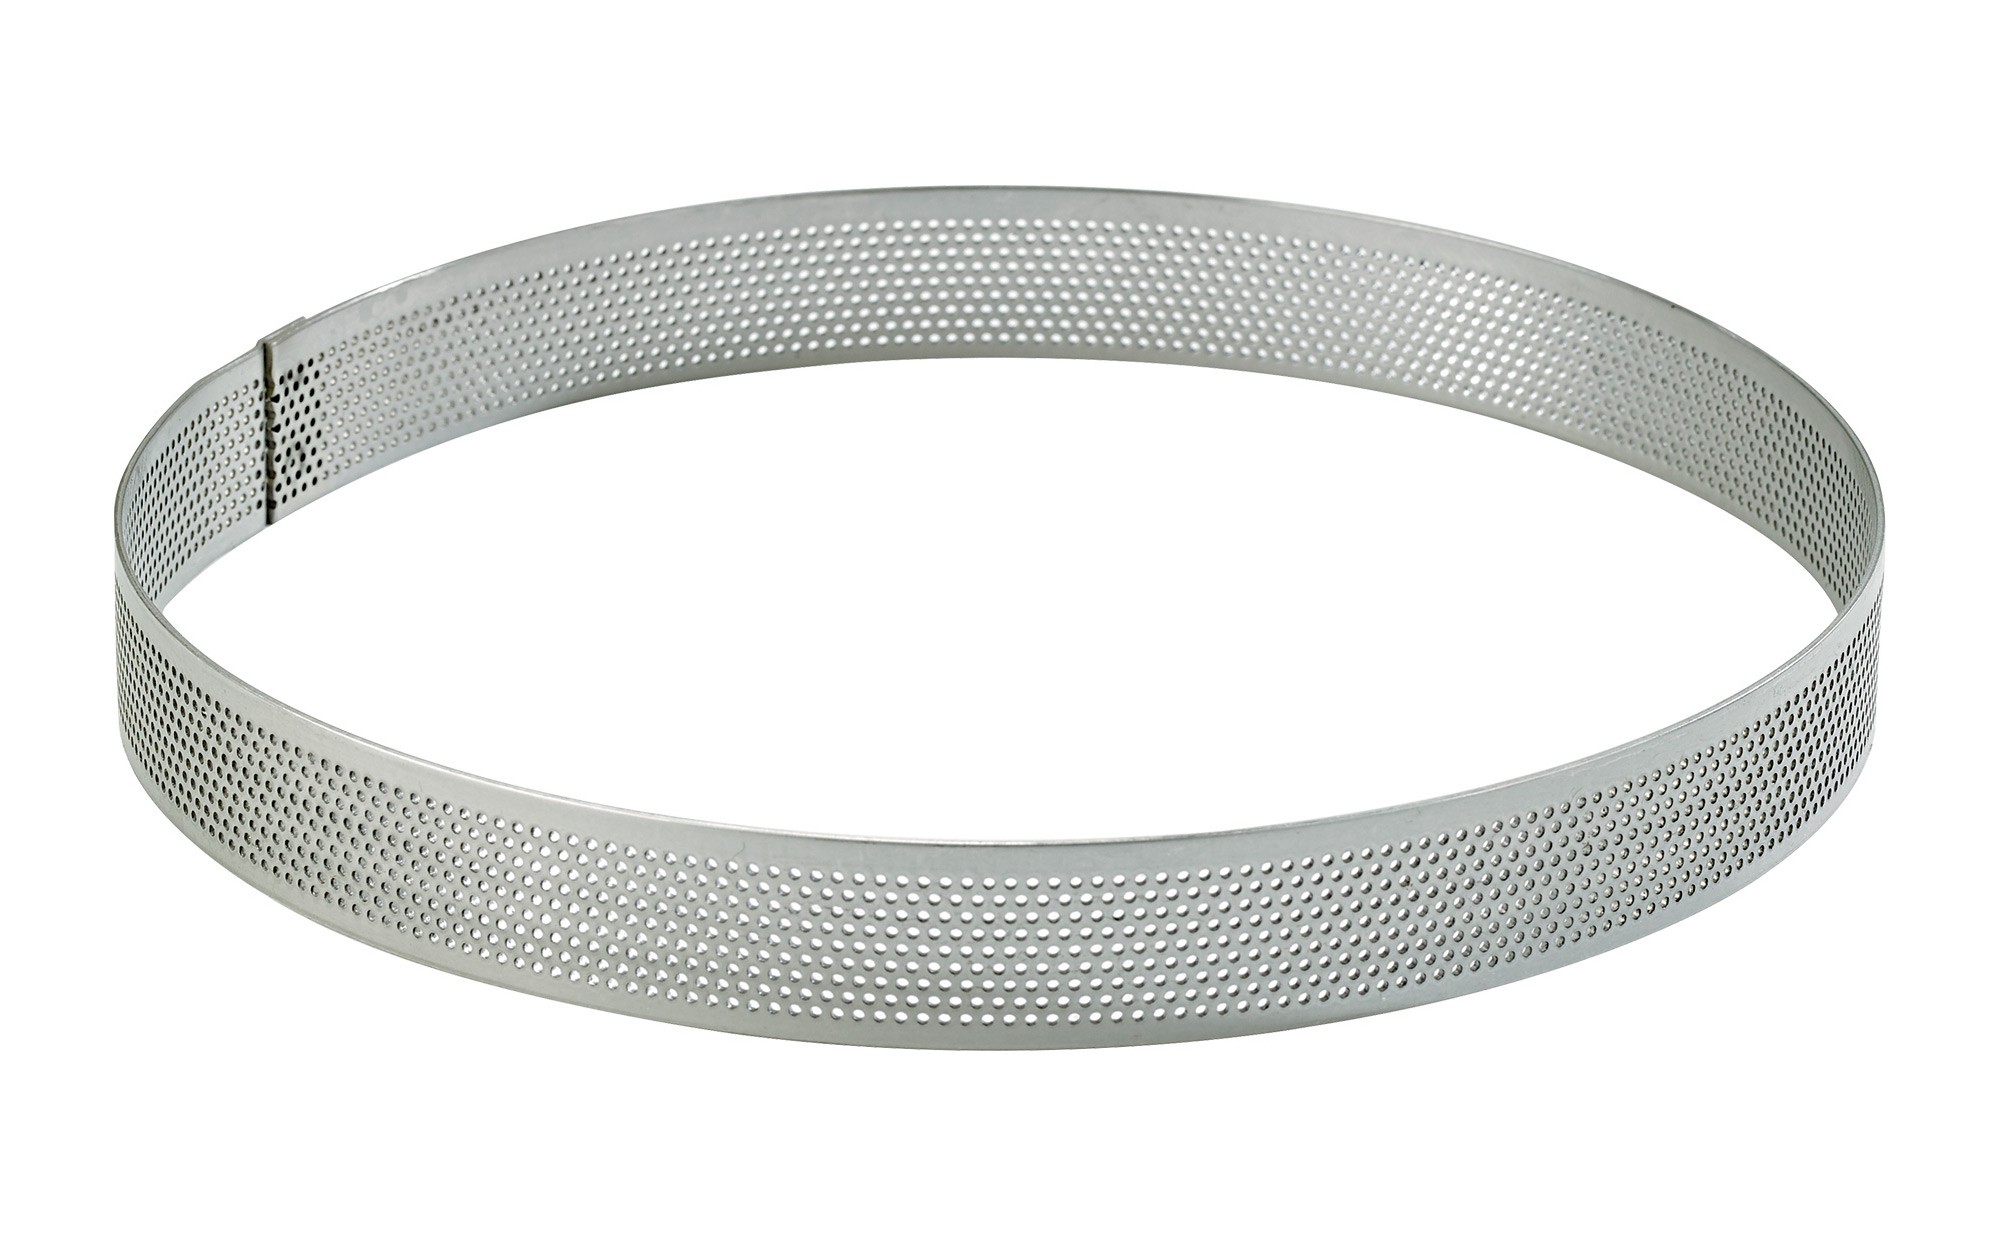 eximir siguiente Ejecutable Stainless Mallard Ferrière perforated pie ring - Colichef.fr